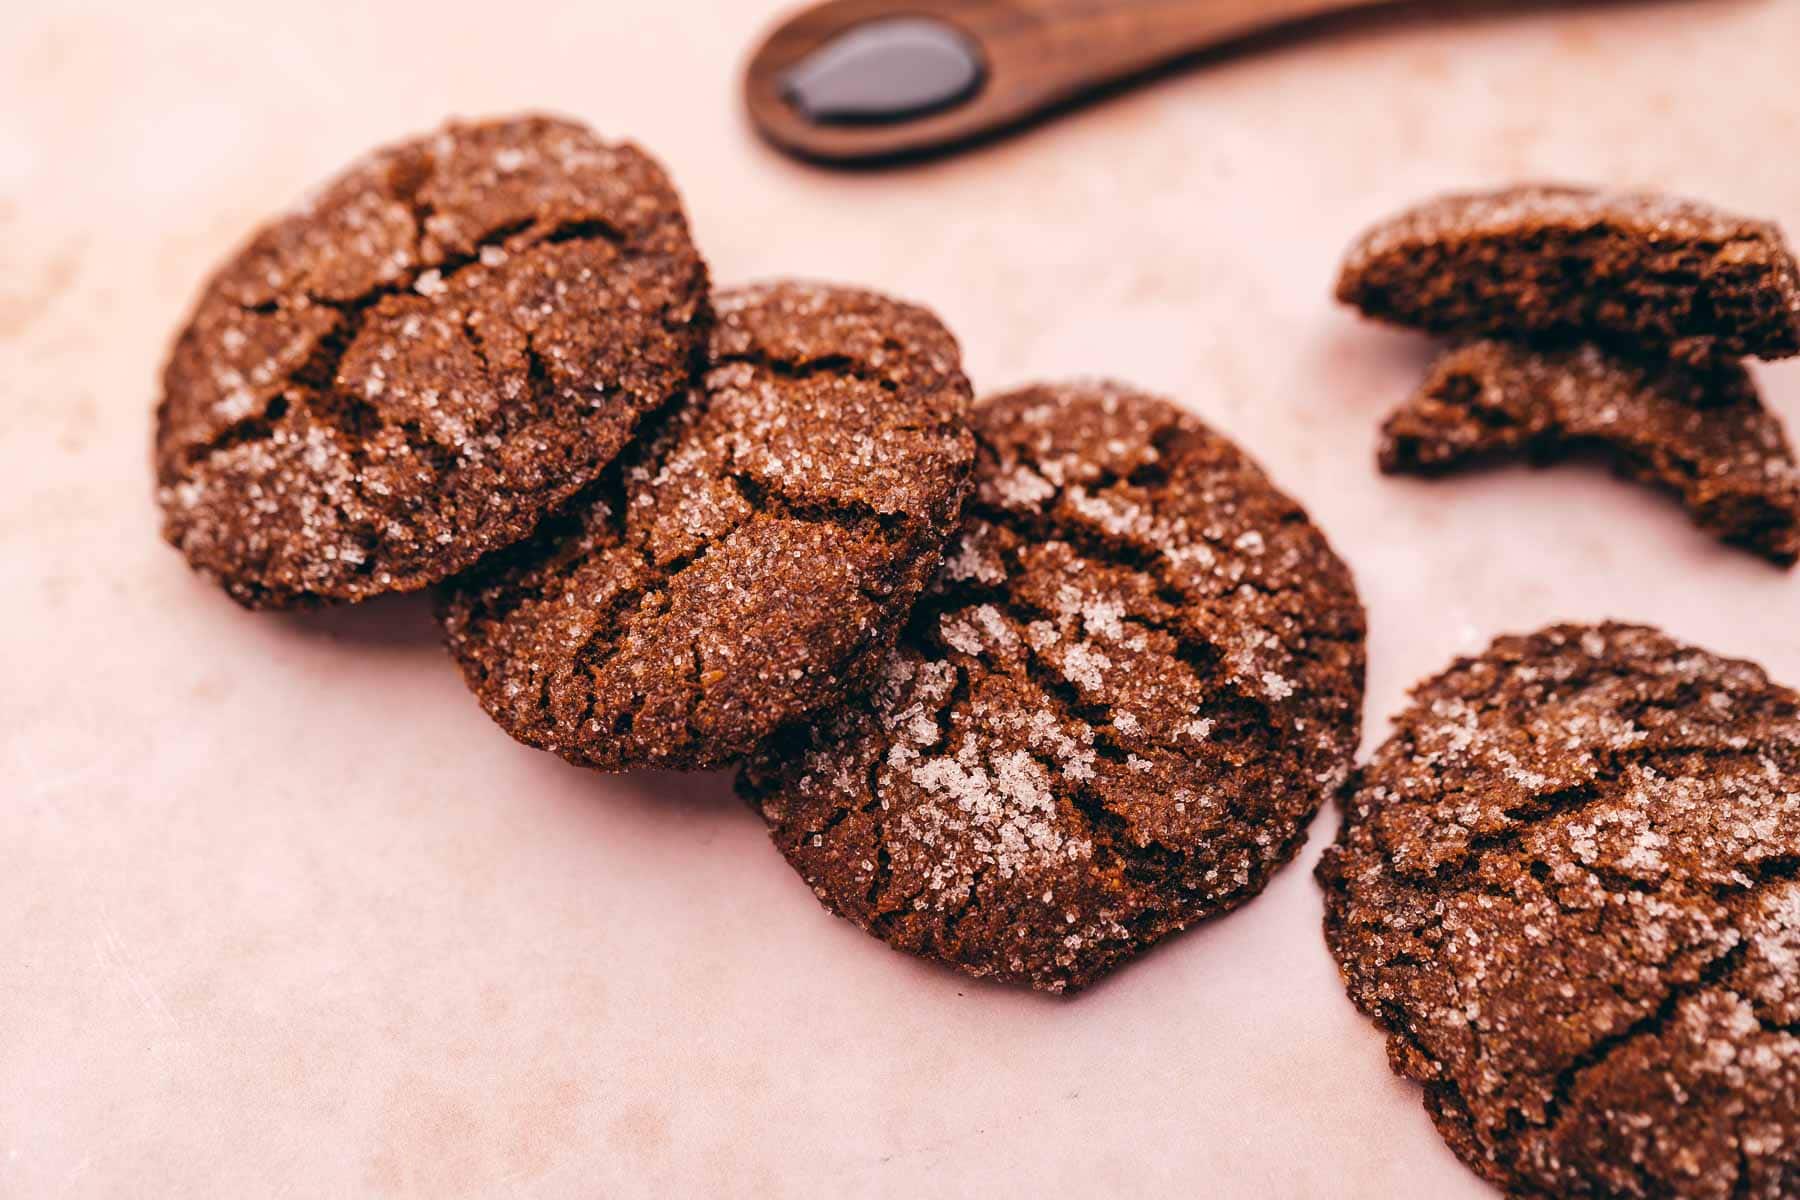 A group of gluten-free chocolate molasses cookies on a pink surface with a spoon.